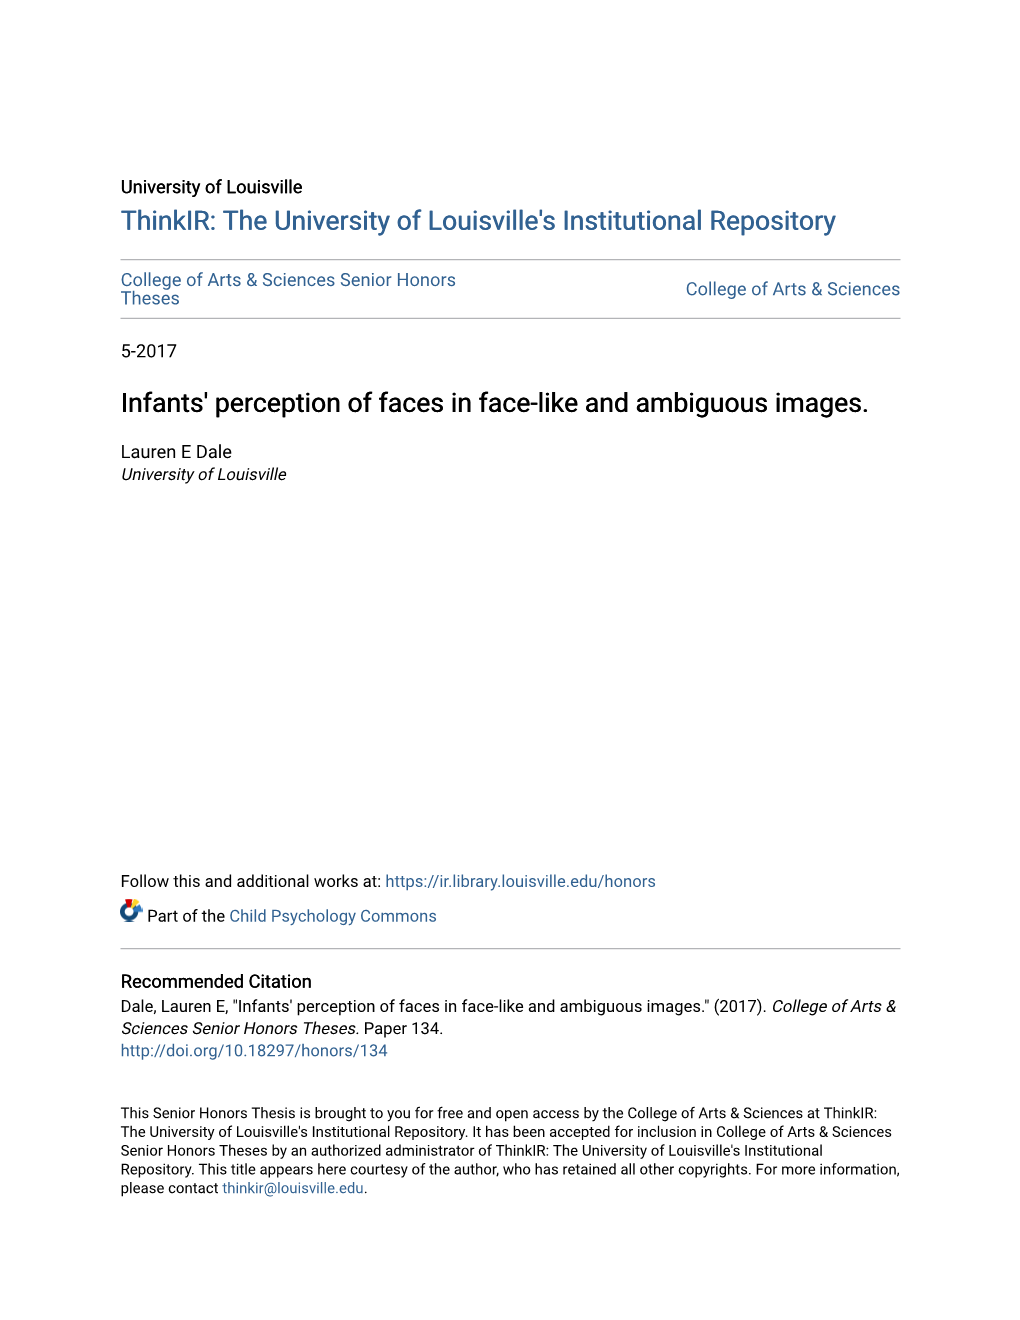 Infants' Perception of Faces in Face-Like and Ambiguous Images